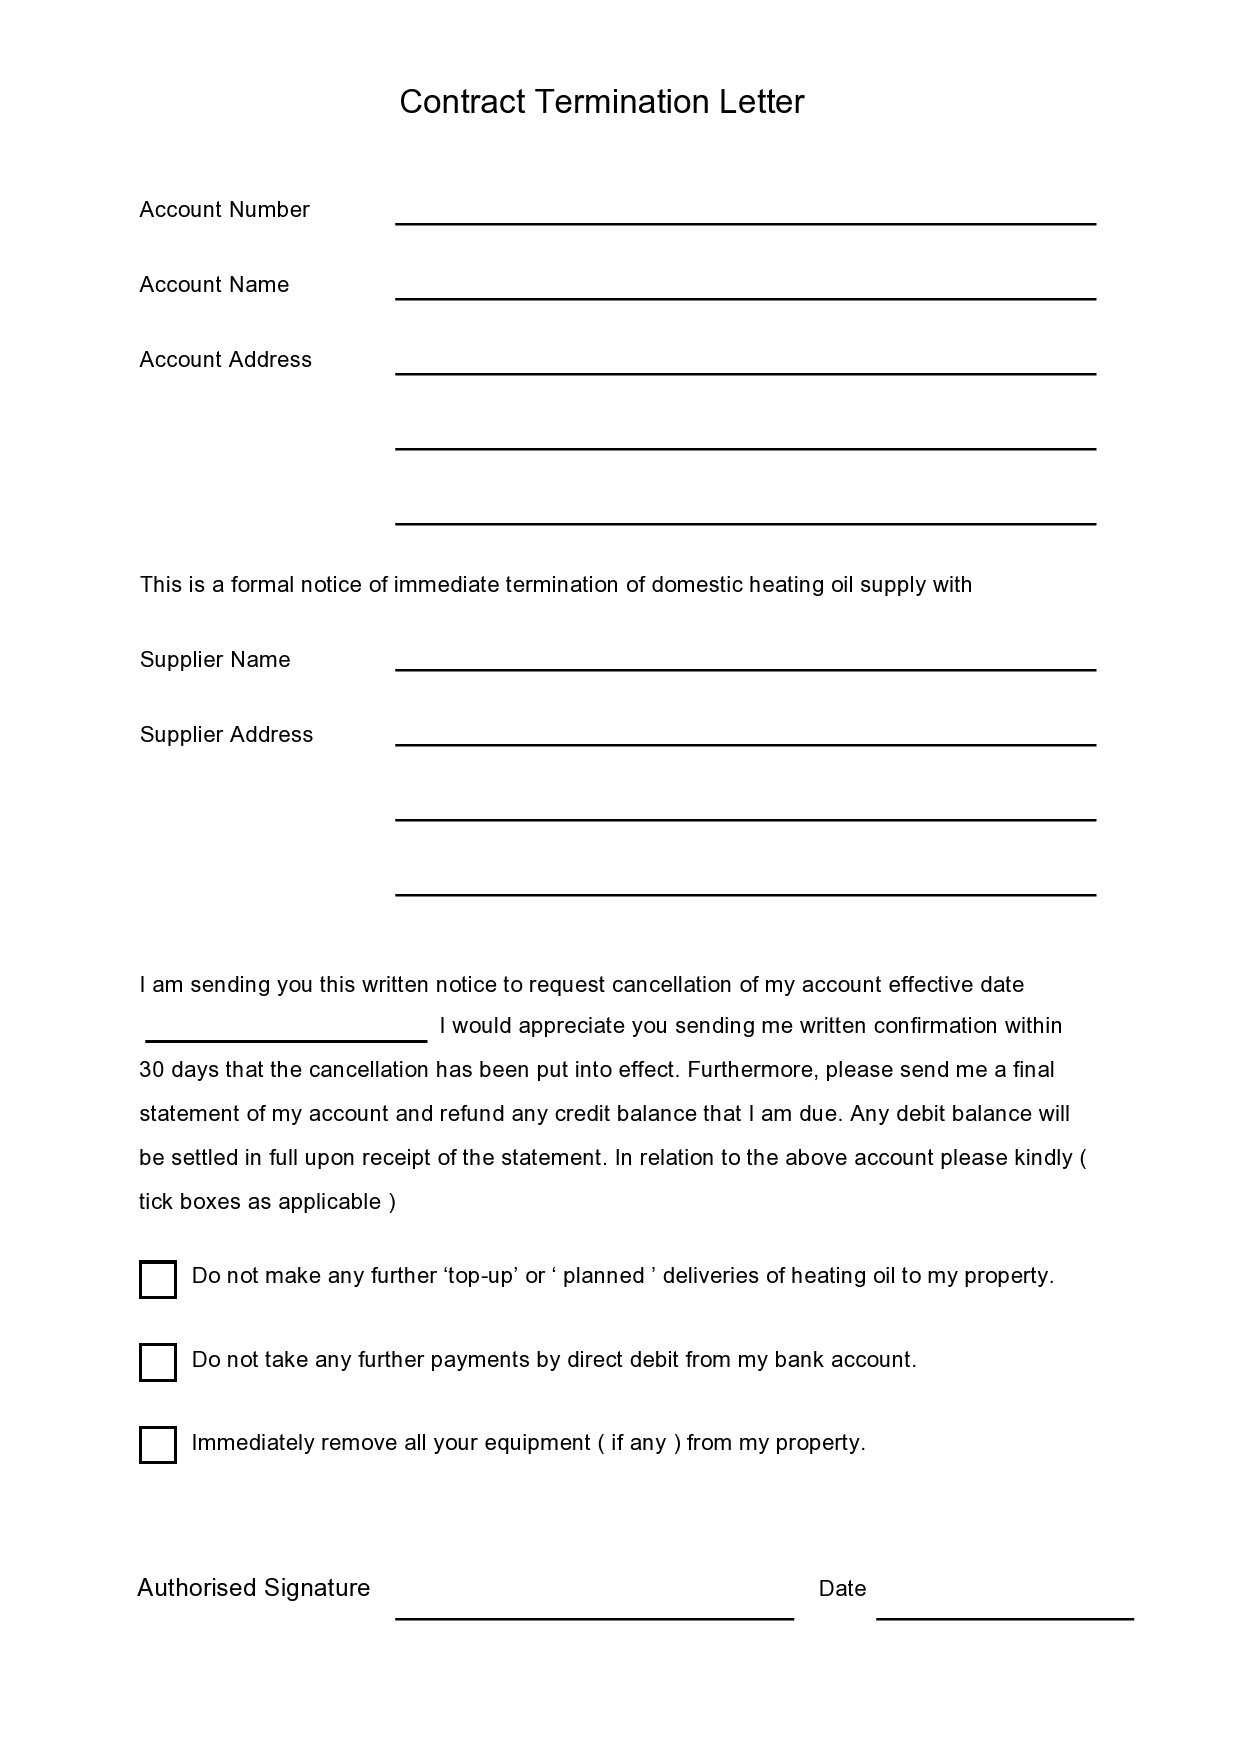 Free contract termination letter 07